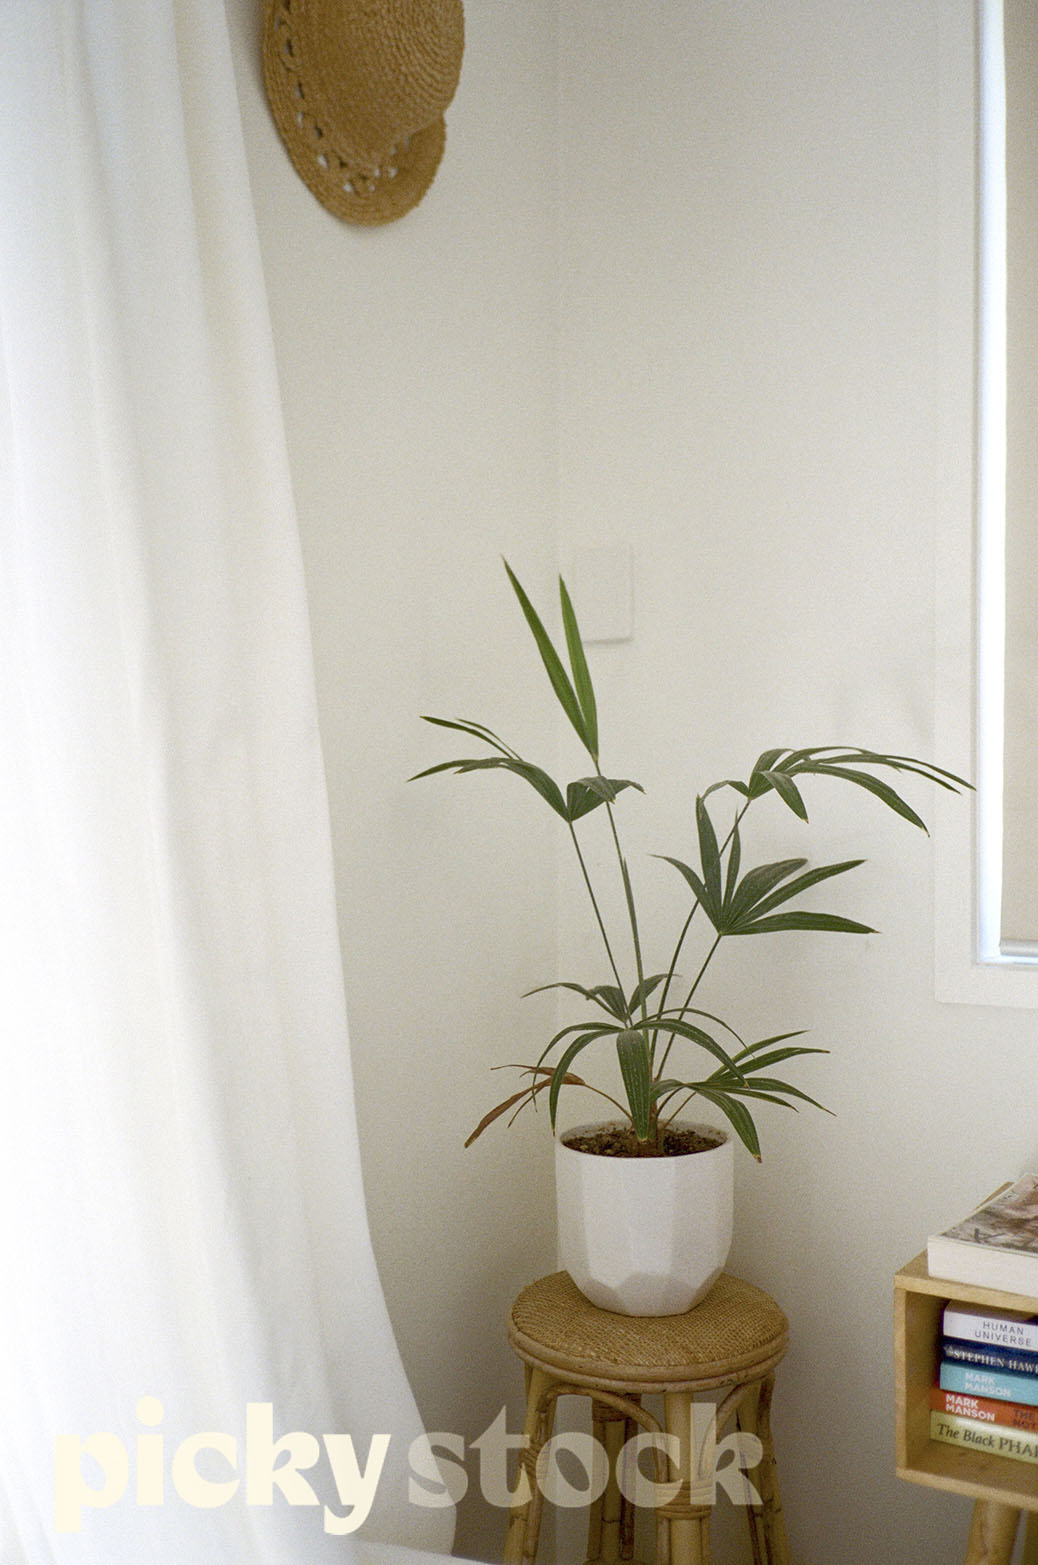 Indoor white pot plant sitting on a small rattan chair. White sheer curtains to right side of frame. Straw hat hanging on the wall. Bedside table full of books on the right hand side. Walls are painted white